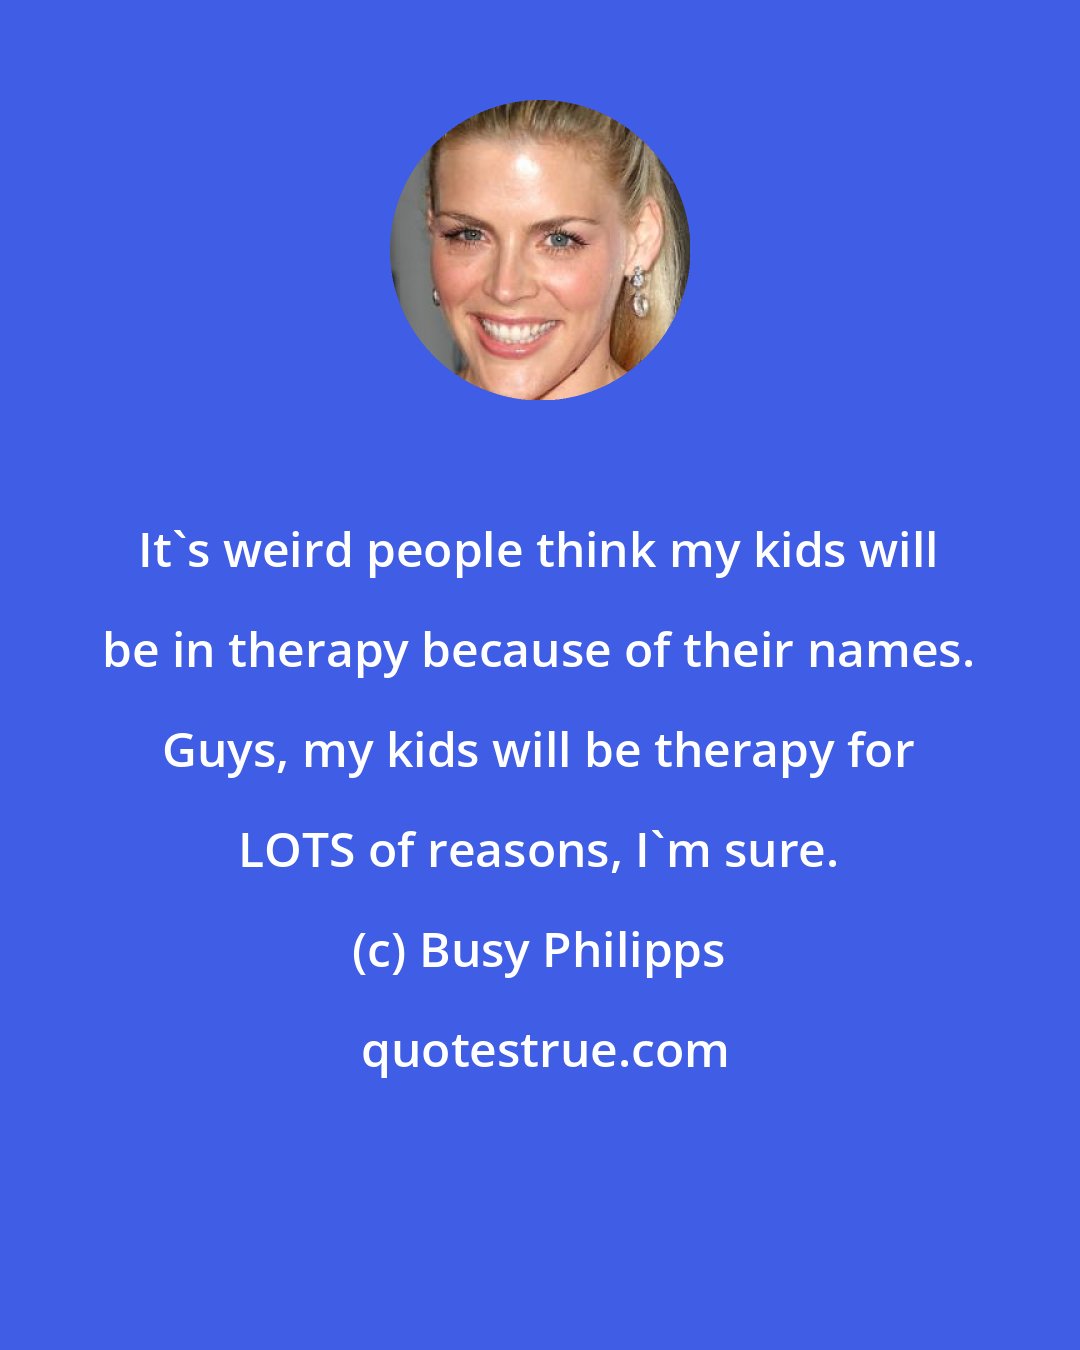 Busy Philipps: It's weird people think my kids will be in therapy because of their names. Guys, my kids will be therapy for LOTS of reasons, I'm sure.